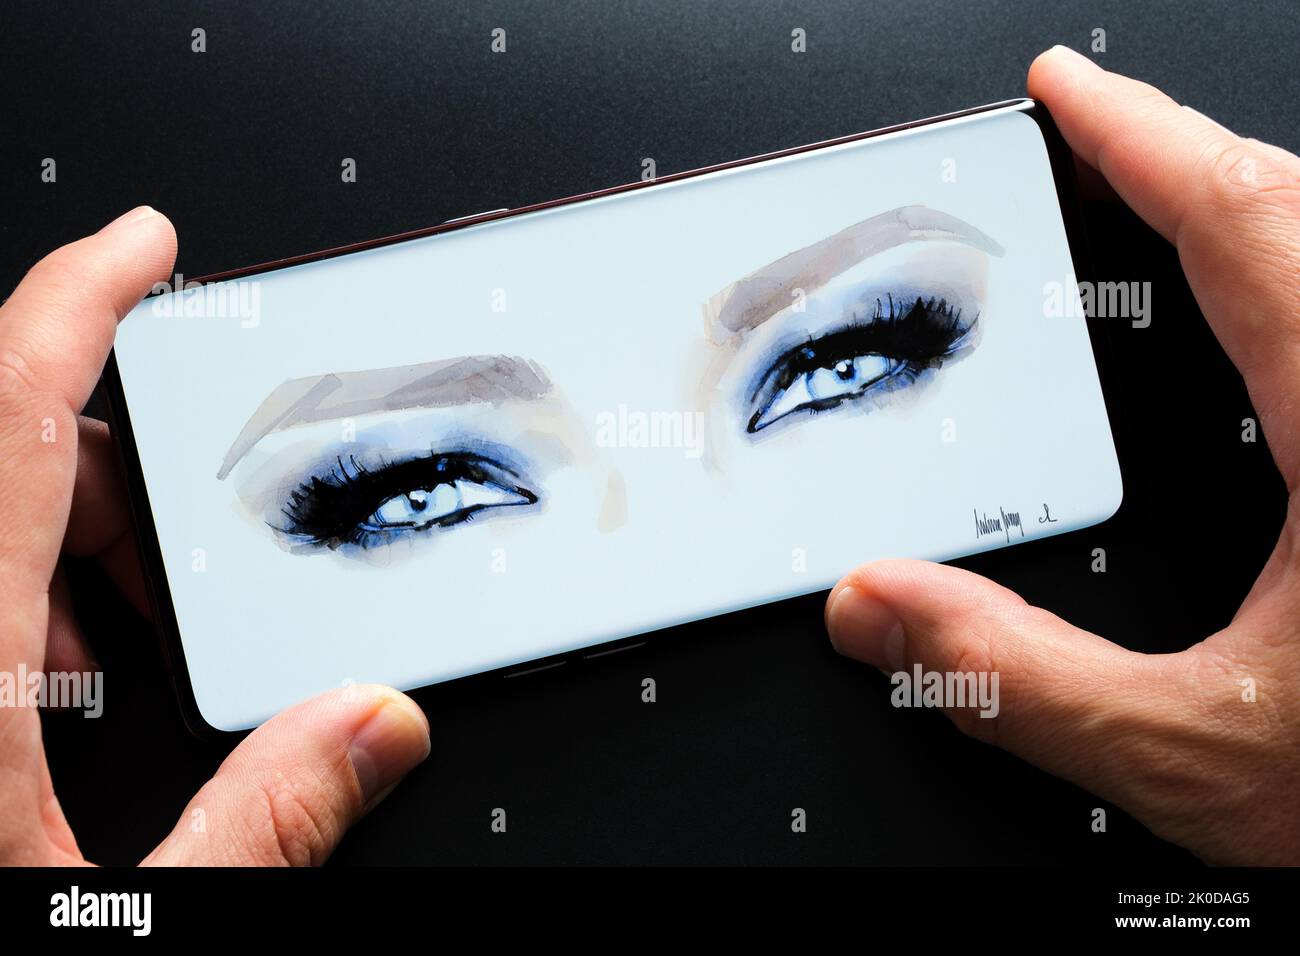 NFT called Melania's Vision seen on the smartphone screen. Marc Antoine Coulon’s watercolor pictures Melania Trump’s blue eyes. Stafford, UK, Septembe Stock Photo